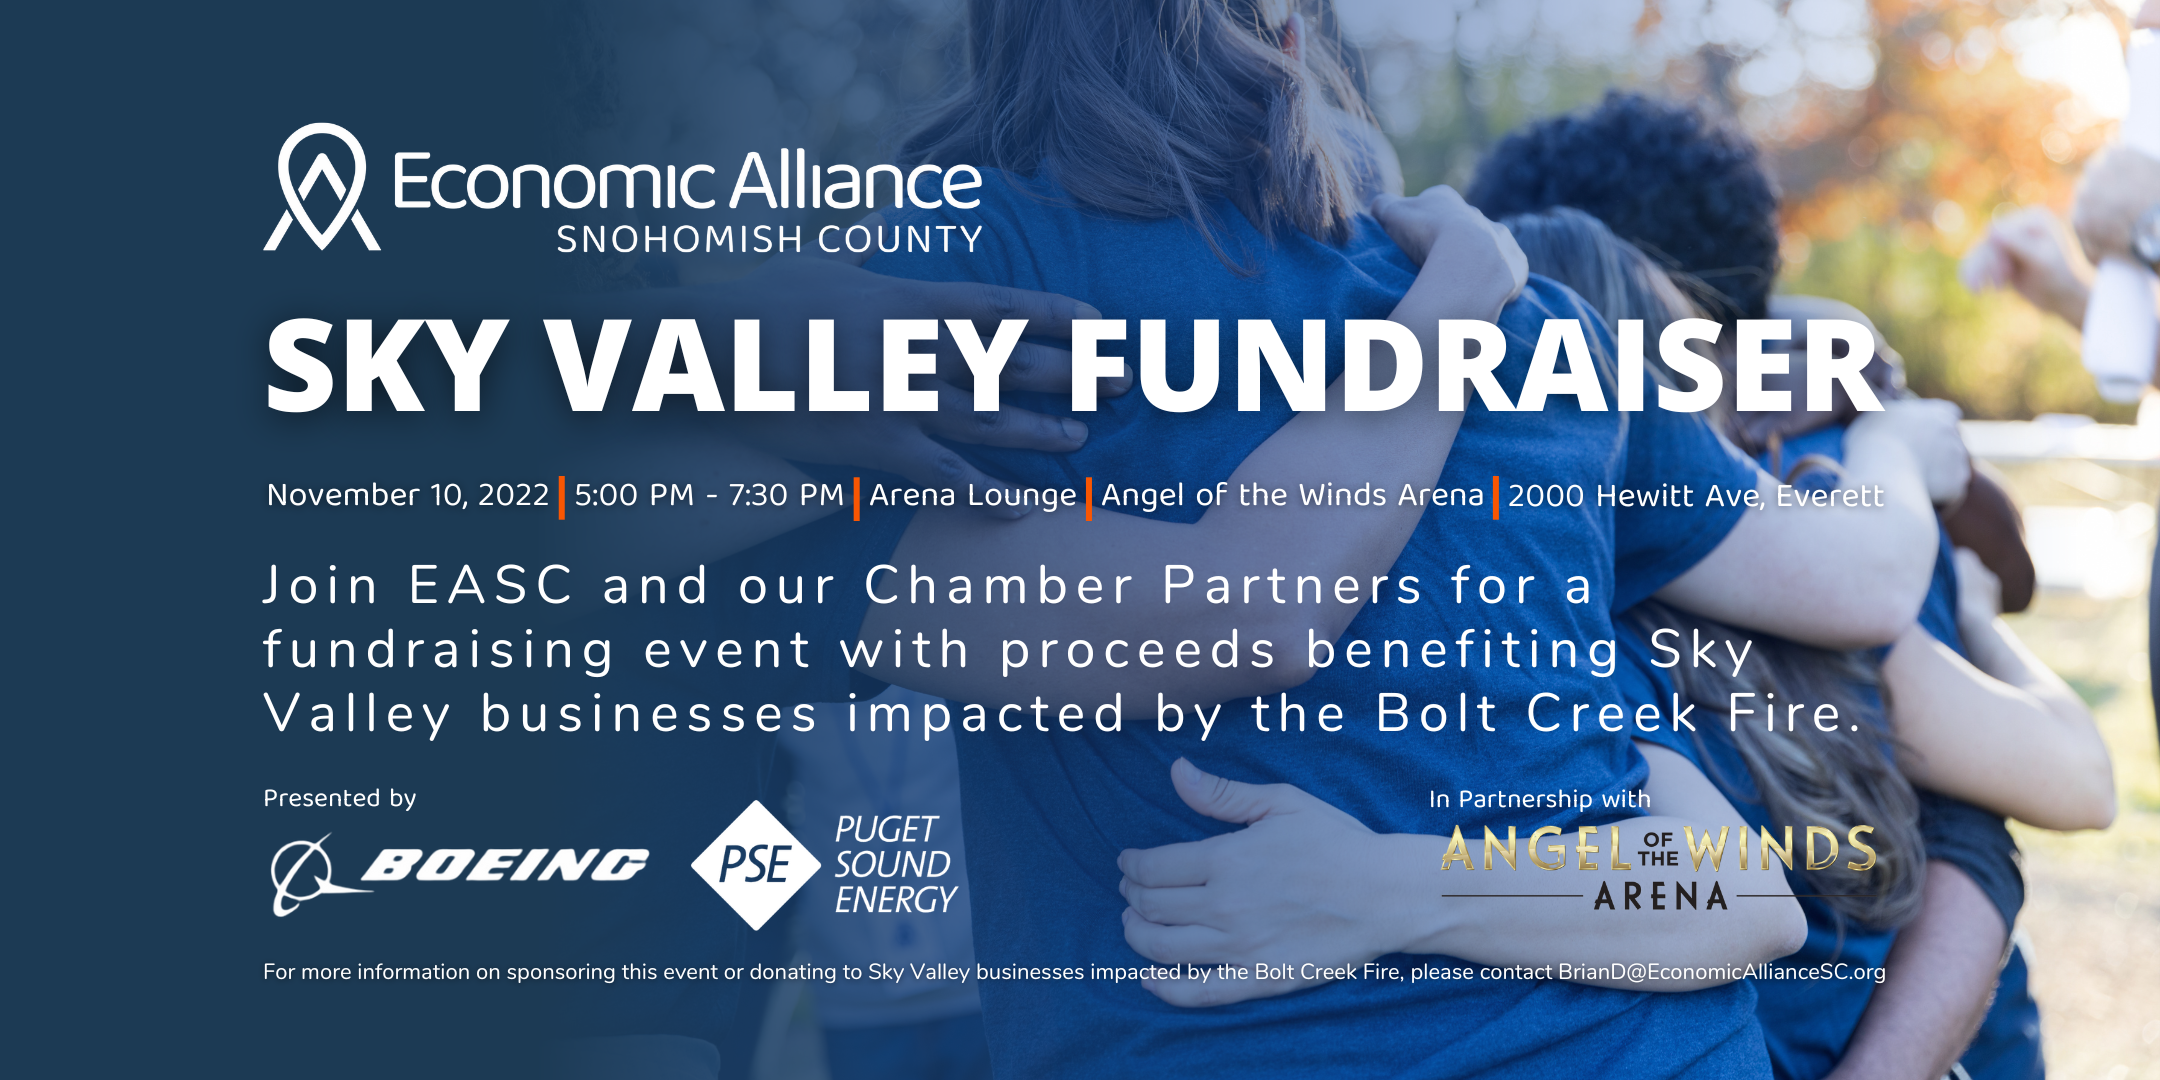 Event Promo Photo For Sky Valley Fundraiser